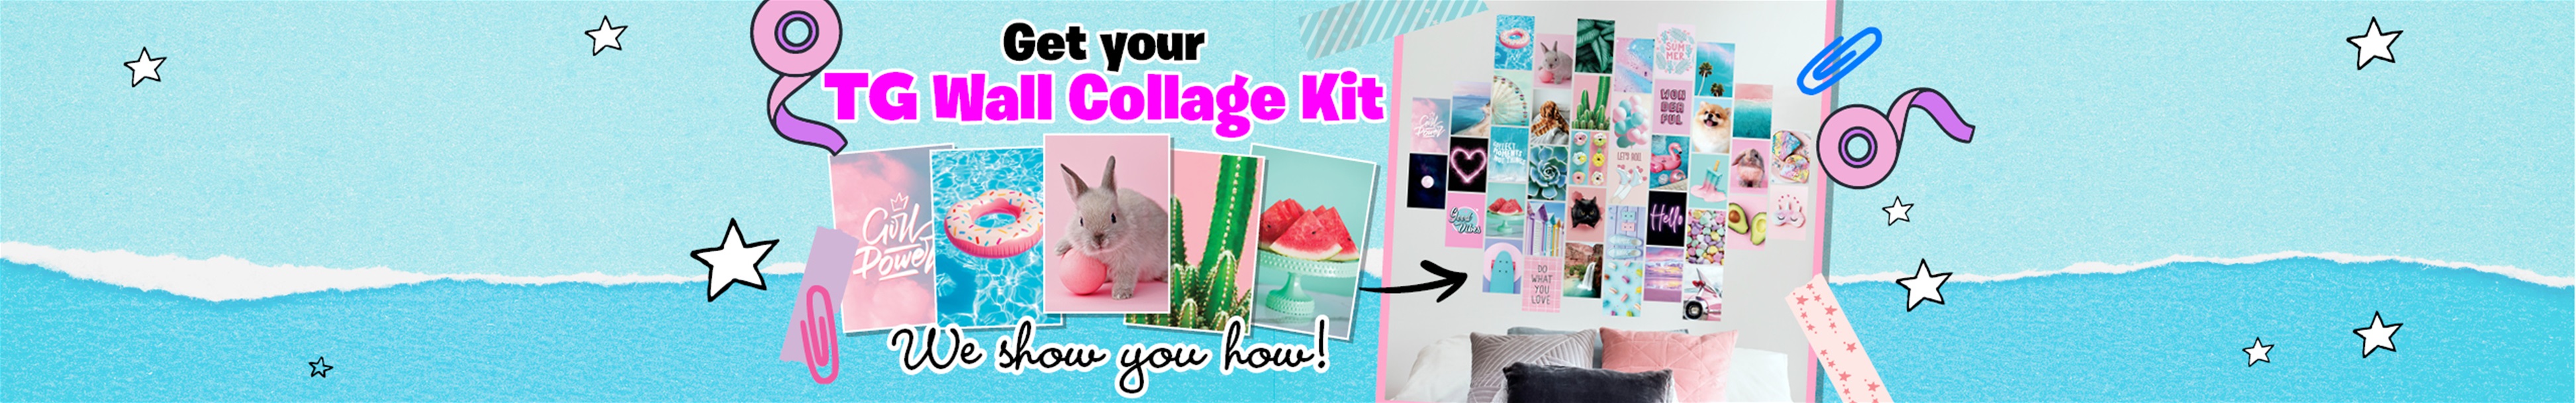 Introducing TG's newest Craft Kit! Get yours now!